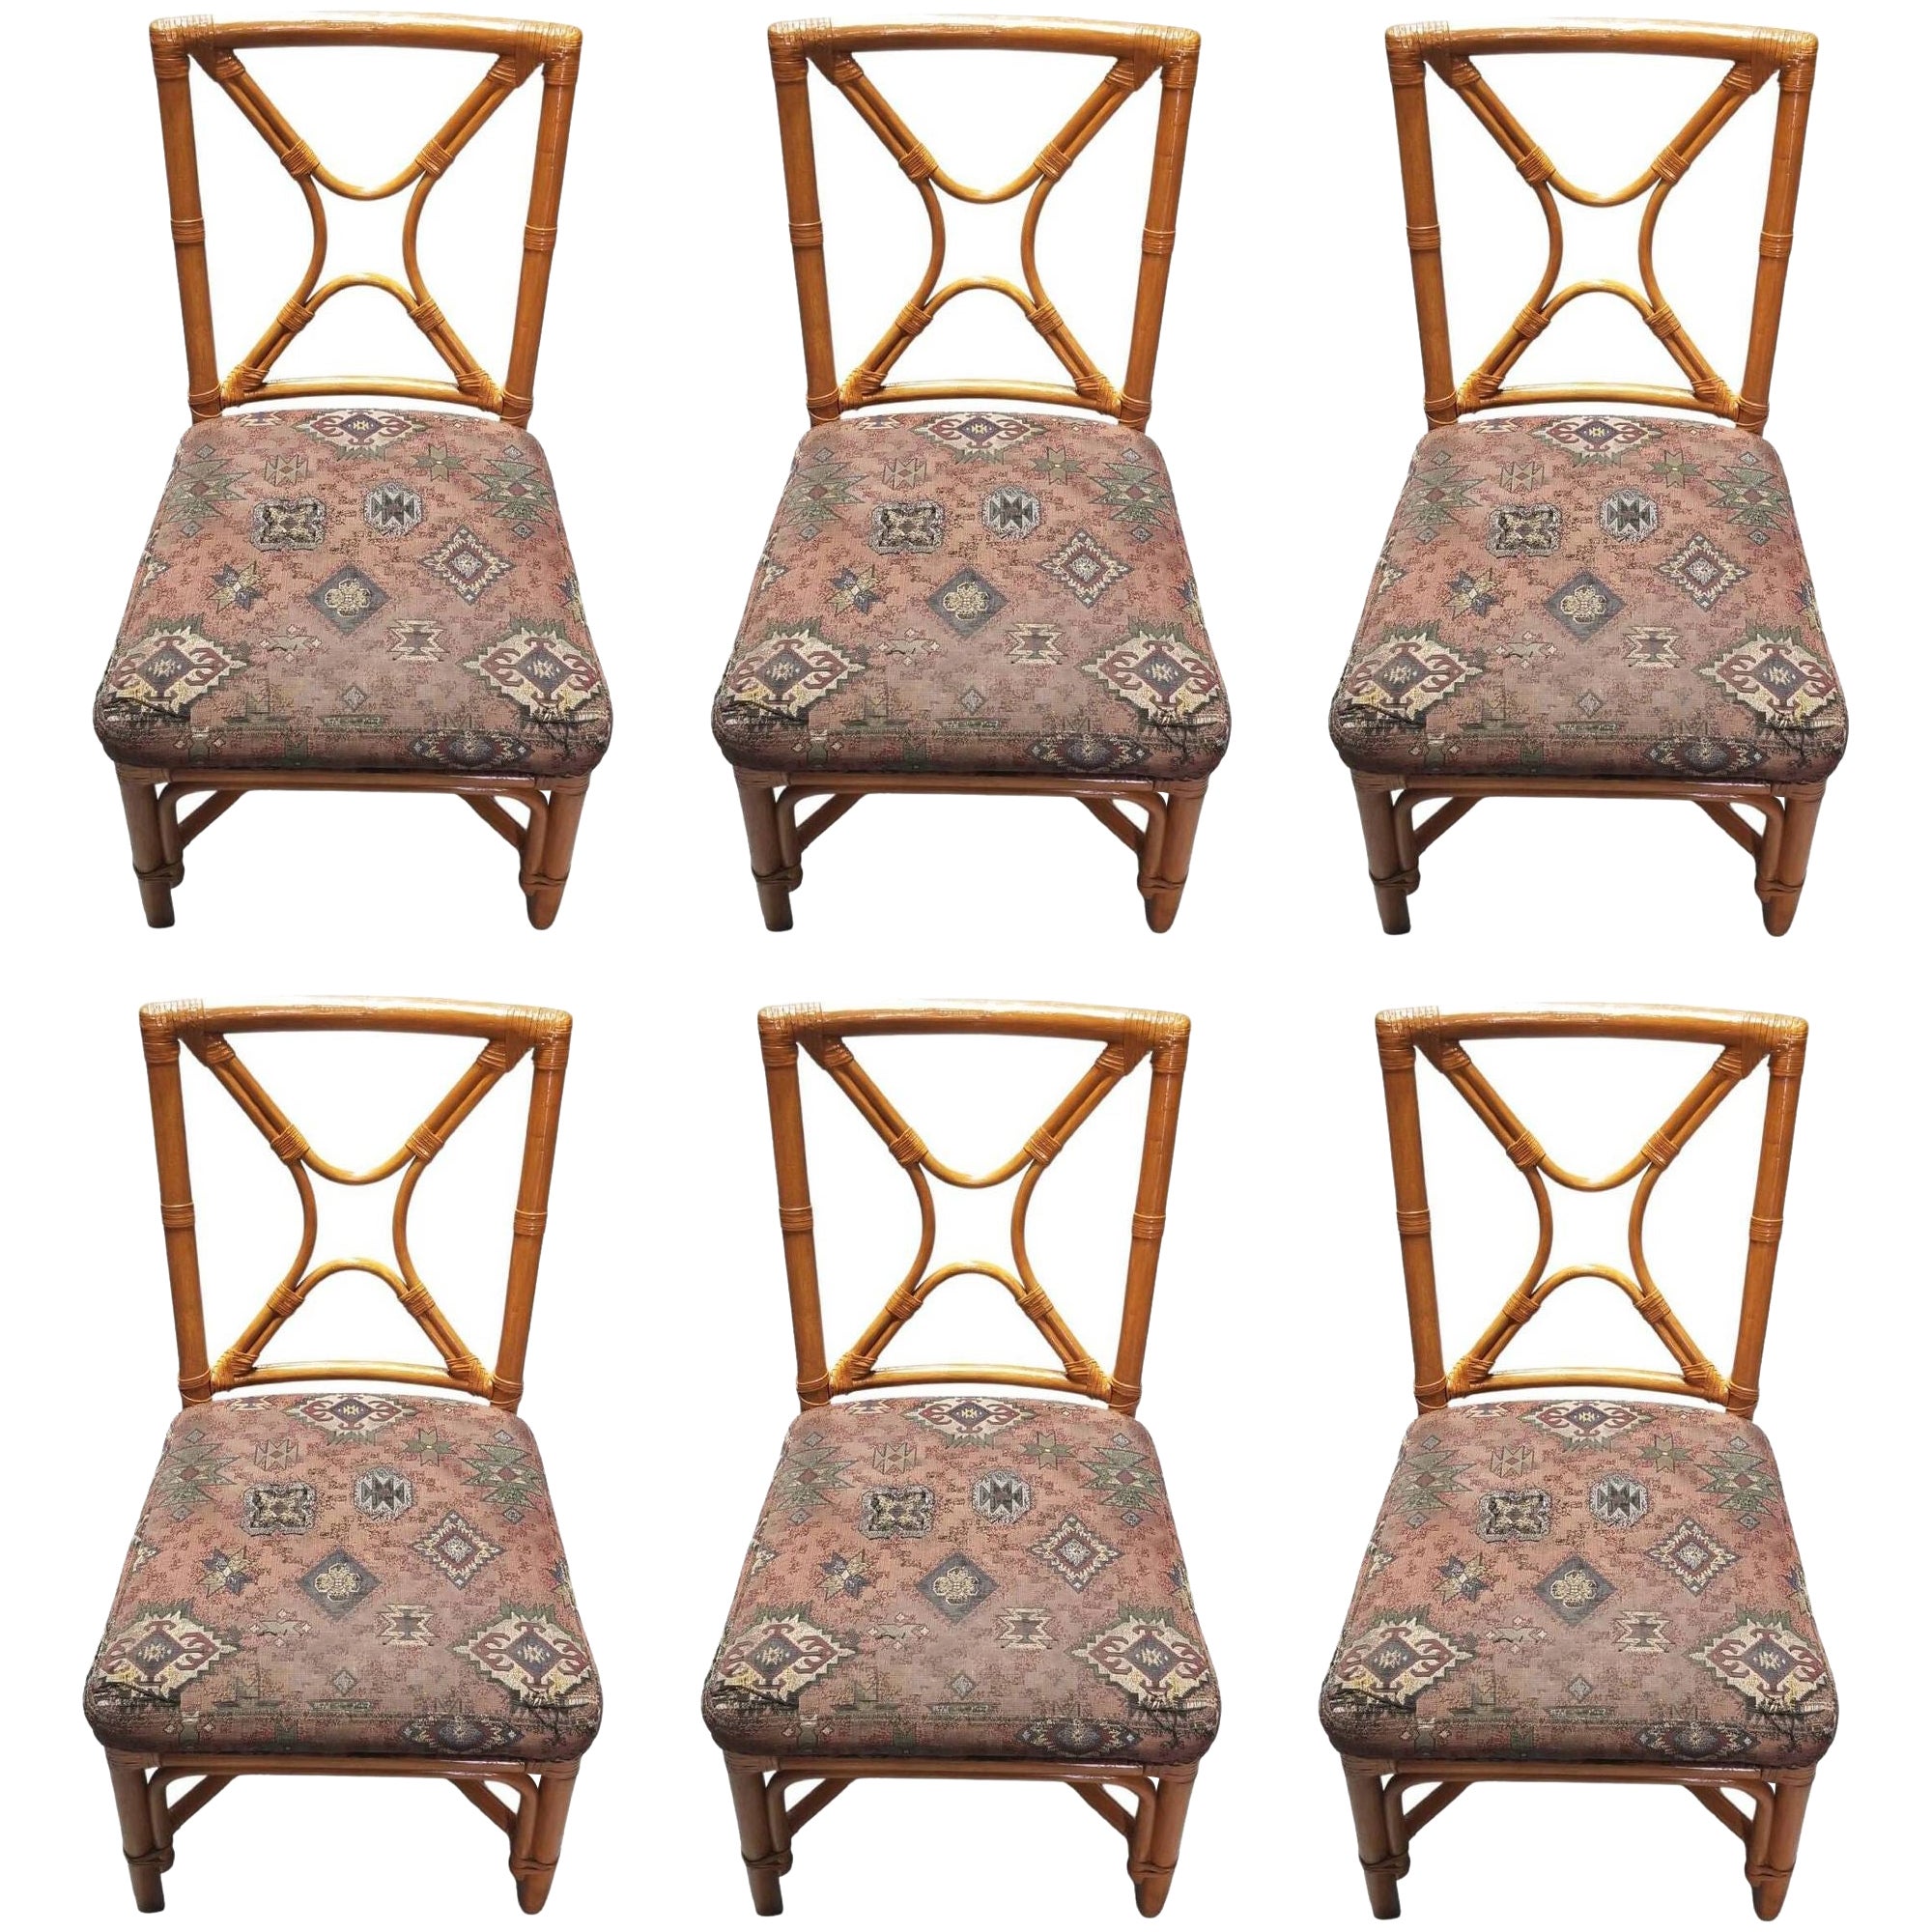 Restored Rattan set of 6 Dining Chairs Featuring X-back and Leather Wrappings. For Sale